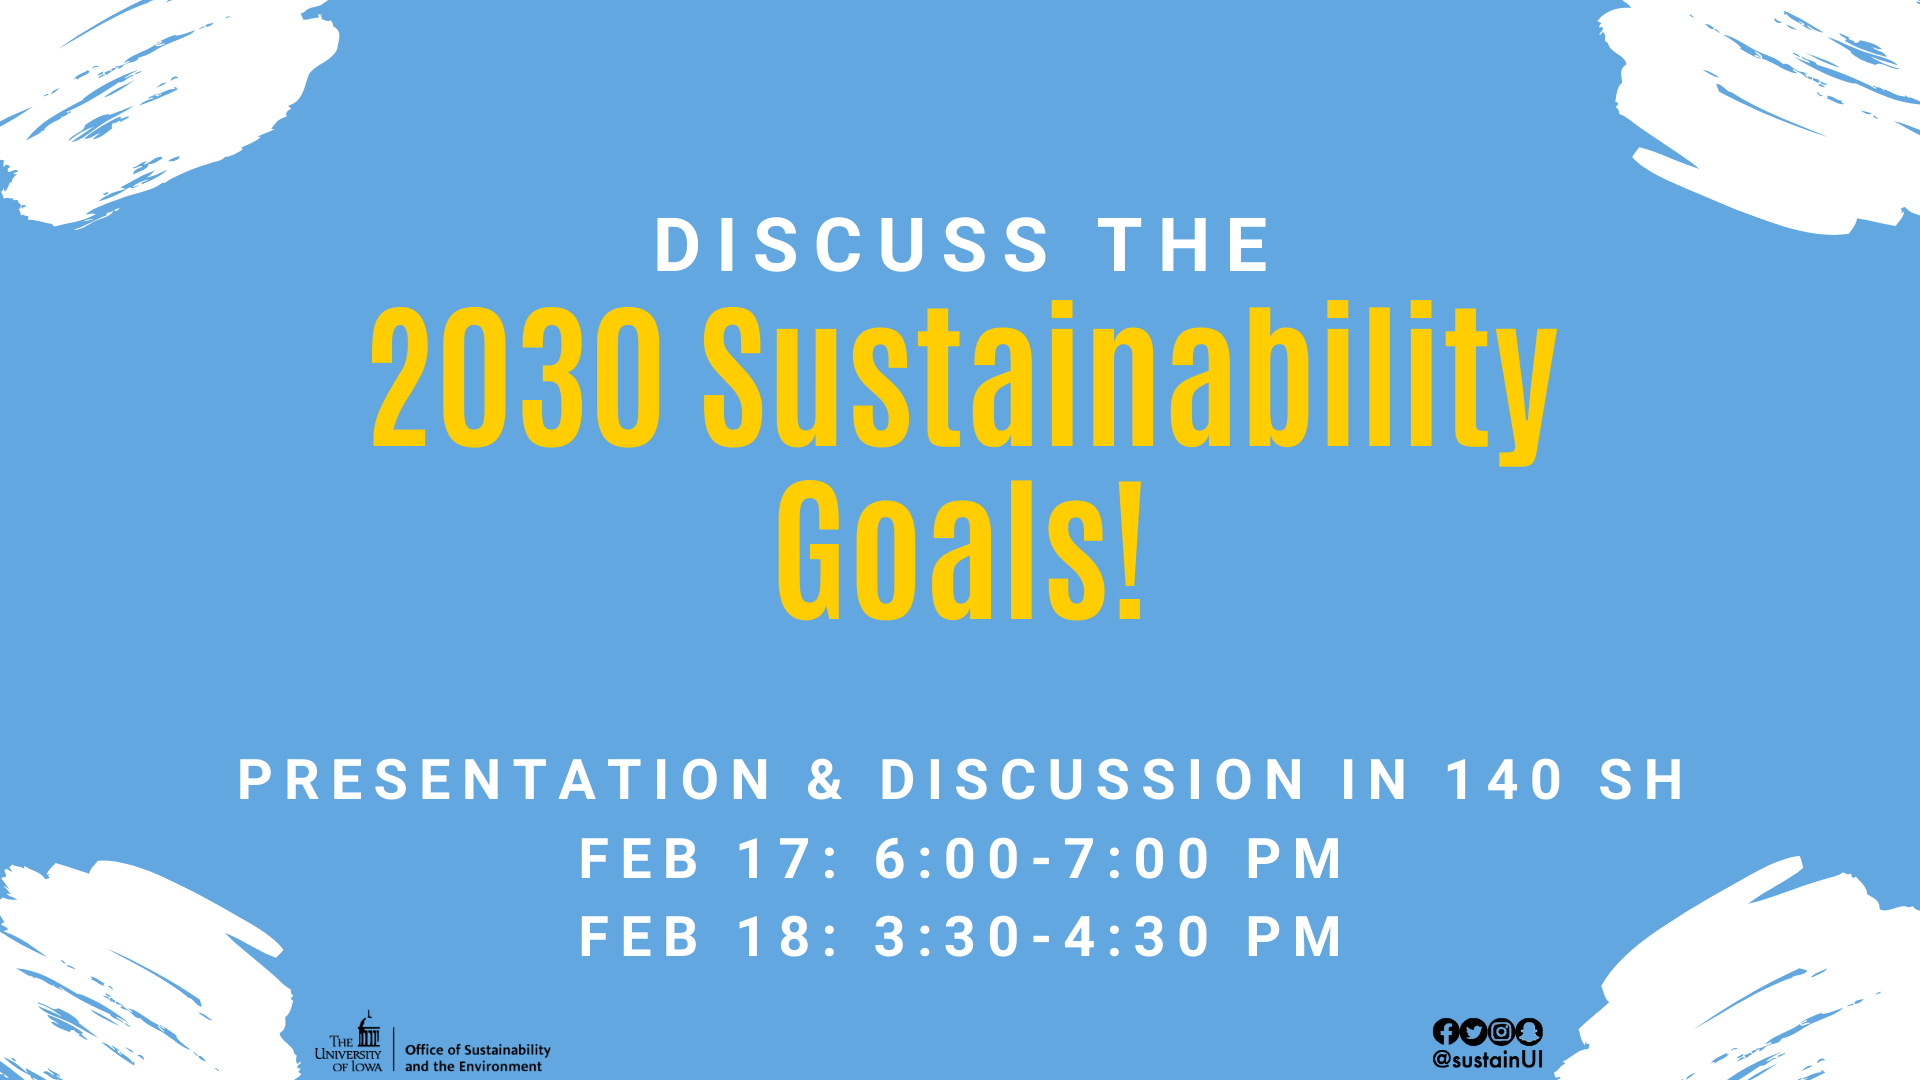  The UI’s 2030 Sustainability Goals Subcommittee will be gathering feedback from UI community faculty, staff and students on the UI’s 2030 Sustainability Goals. This session will include a presentation by the 2030 Sustainability Goals Subcommittee, open discussion, and feedback gathering.  There will be two opportunities to attend the listening posts and weigh in on the draft 2030 Sustainability Goals. They are on:  •	Monday February 17, 2020 from 6-7 pm in 140 SH; and  